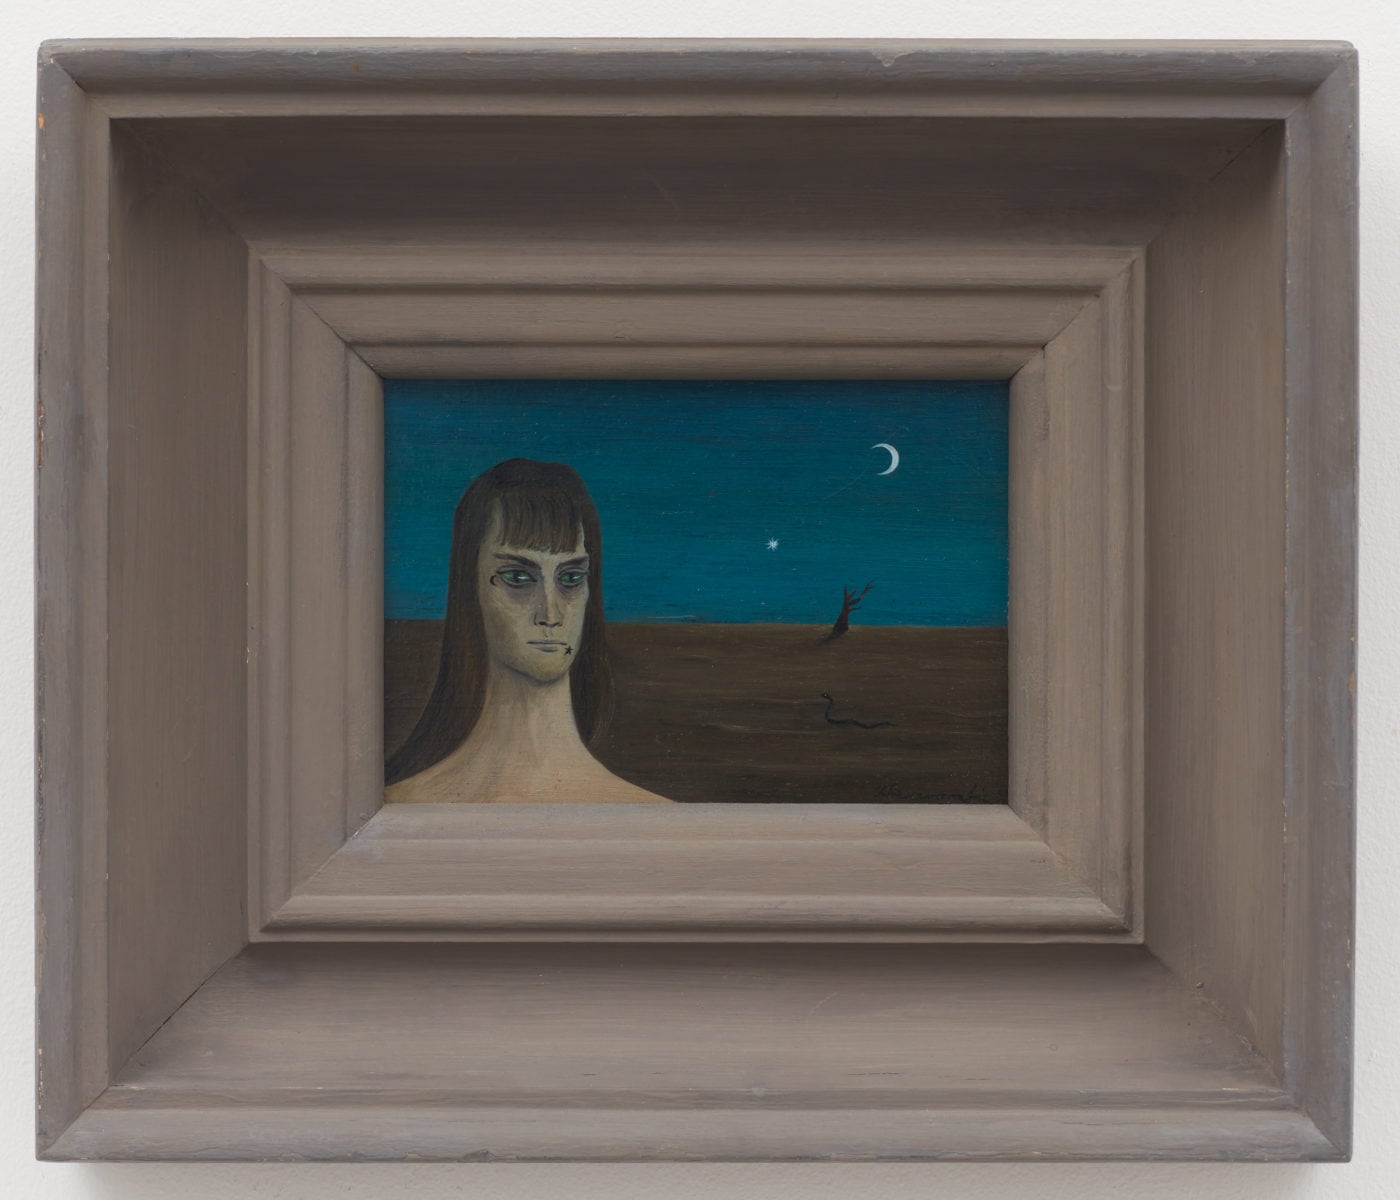 Image 03: Gertrude Abercrombie, Star and Crescent (1948), oil on Masonite, 127 x 177.8 mm (unframed), 279.4 x 330.2 mm (framed). Collection of Illinois State Museum, Illinois Legacy Collection, gift of Marian & Leon Depres.